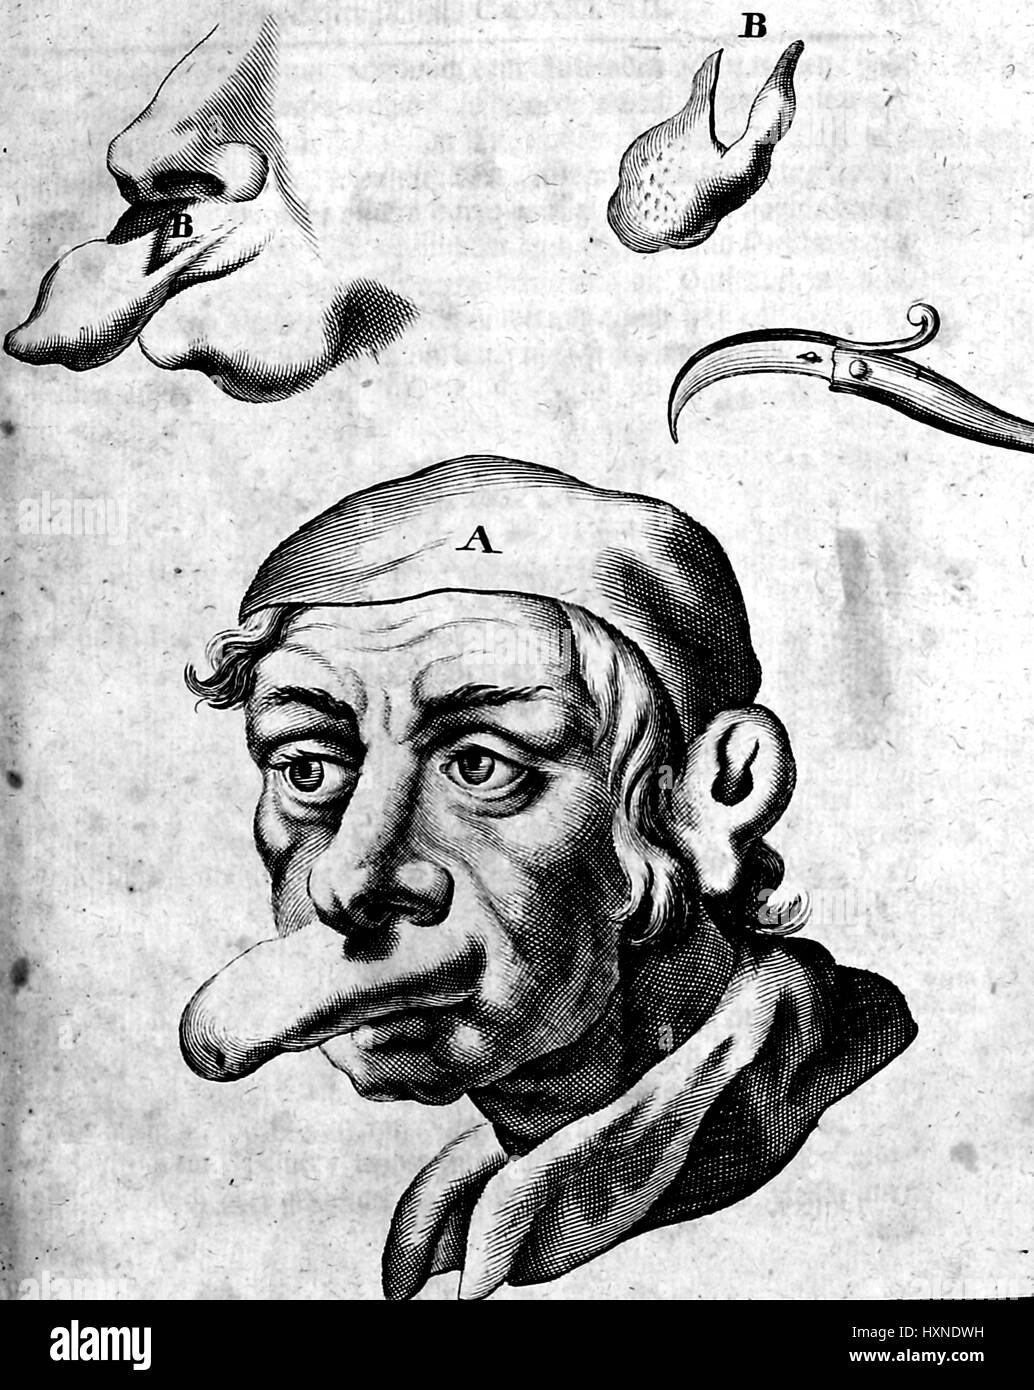 Medical illustration of a man with a large protruding lip deformity, as well as a detail view of the deformity, and a surgical tool used to remove the deformity, 1705. Stock Photo